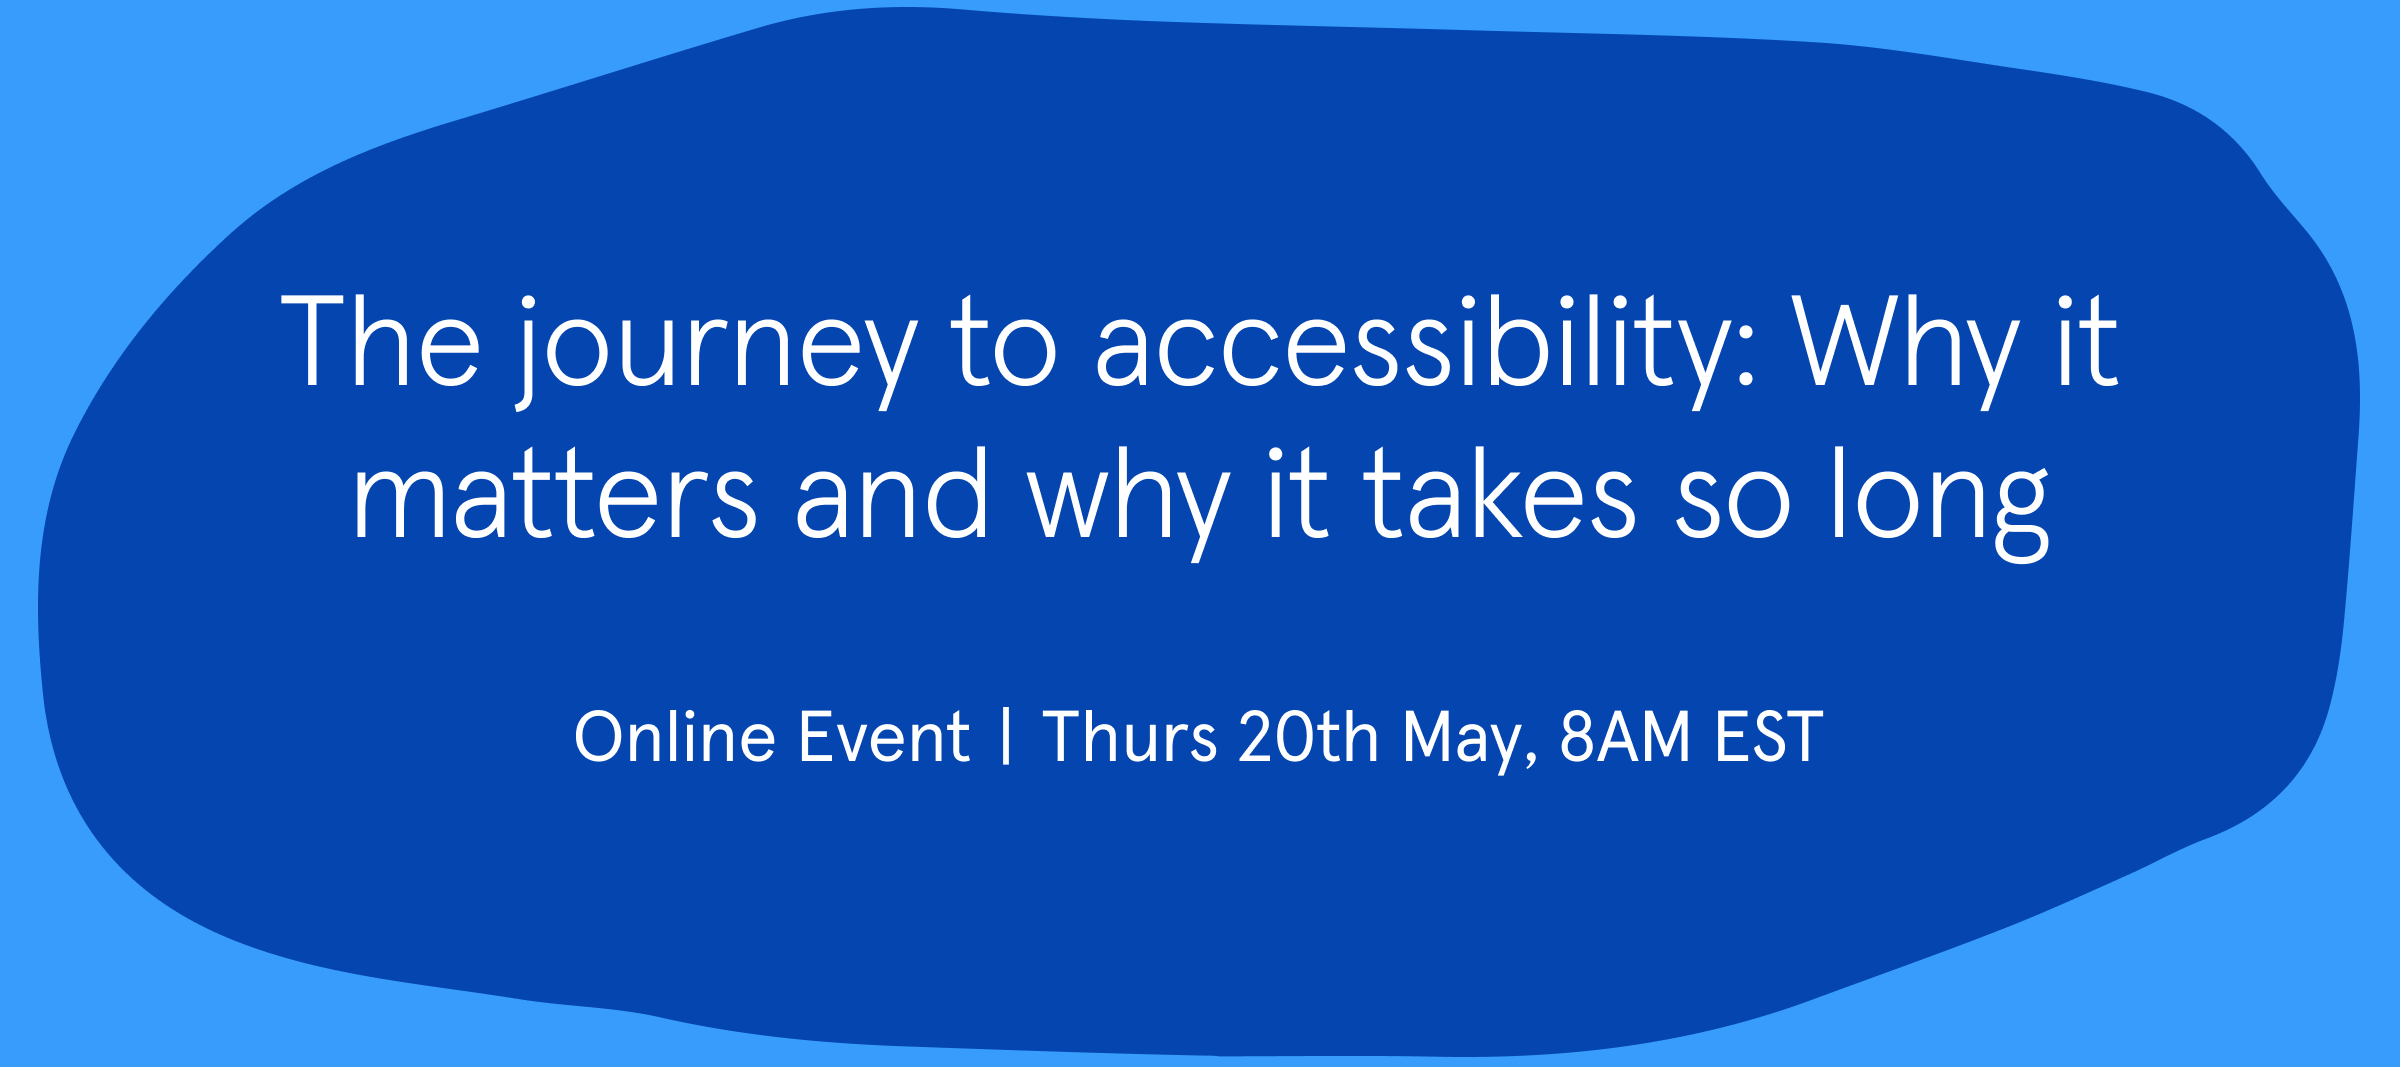 Find out about Typeform's journey towards accessibility